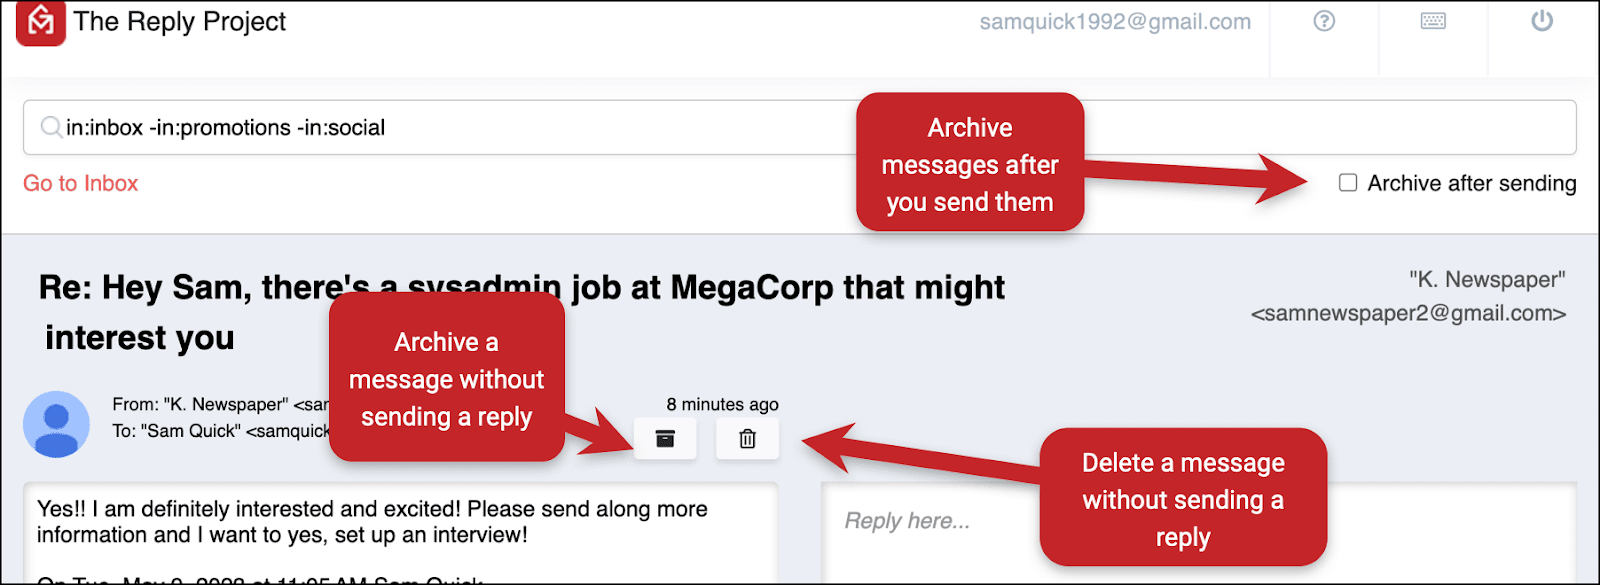 Archiving and deleting messages